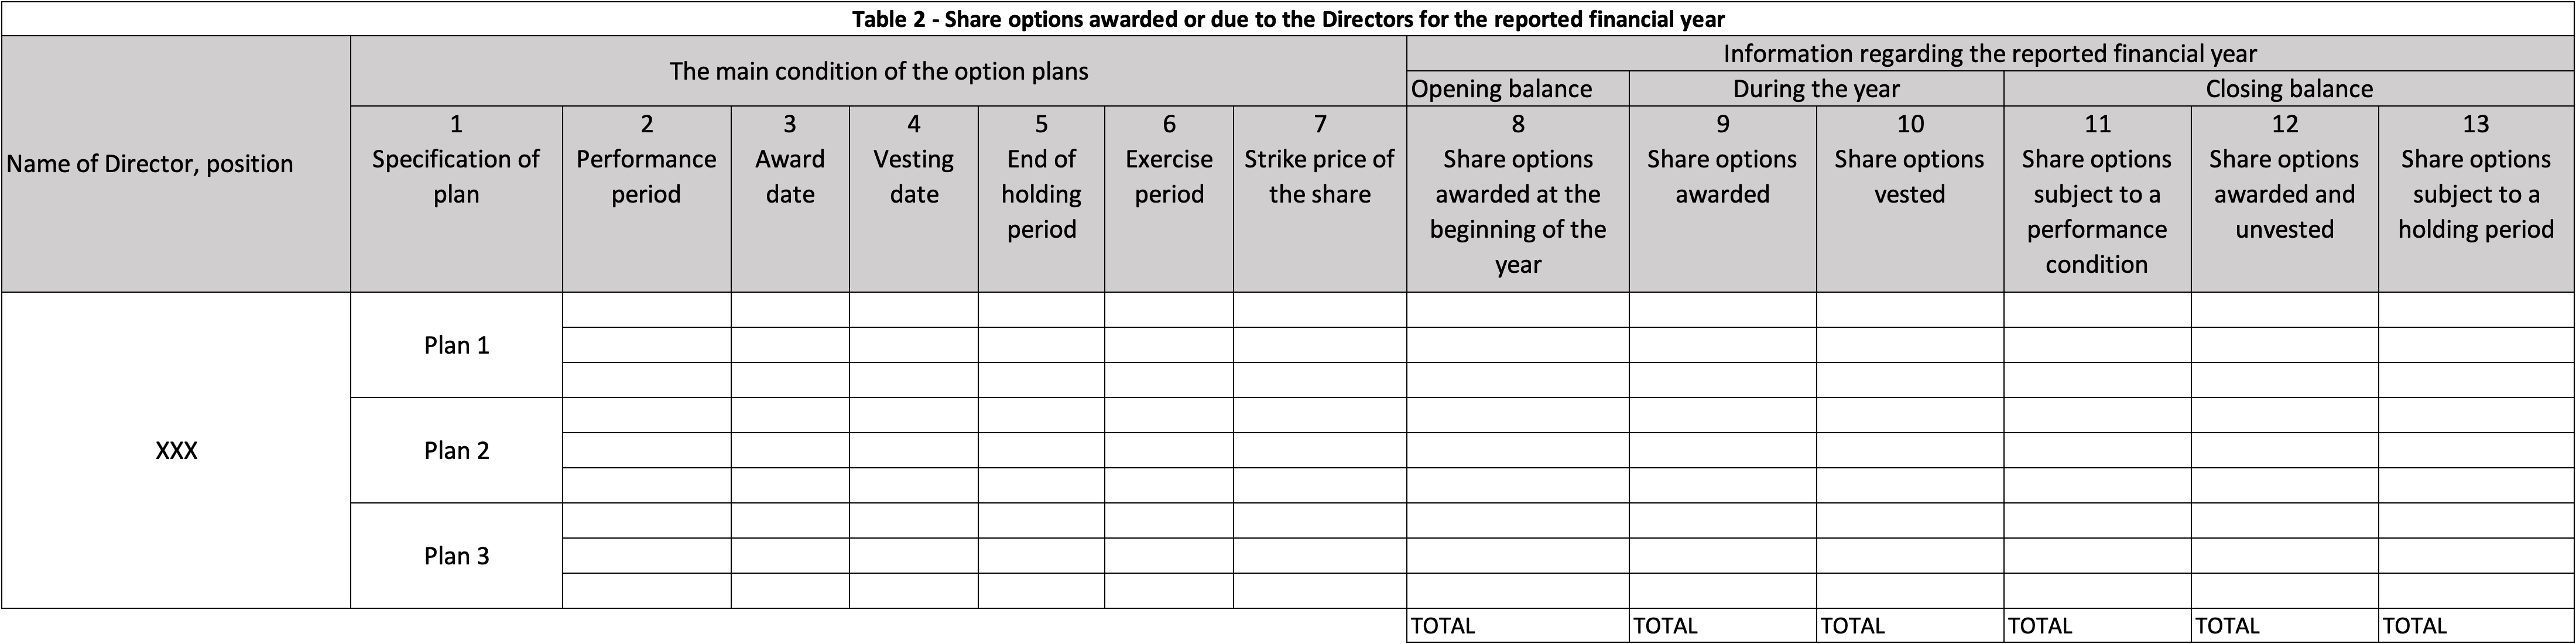 Table 2 - Share options awarded or due to the Directors for the reported financial year